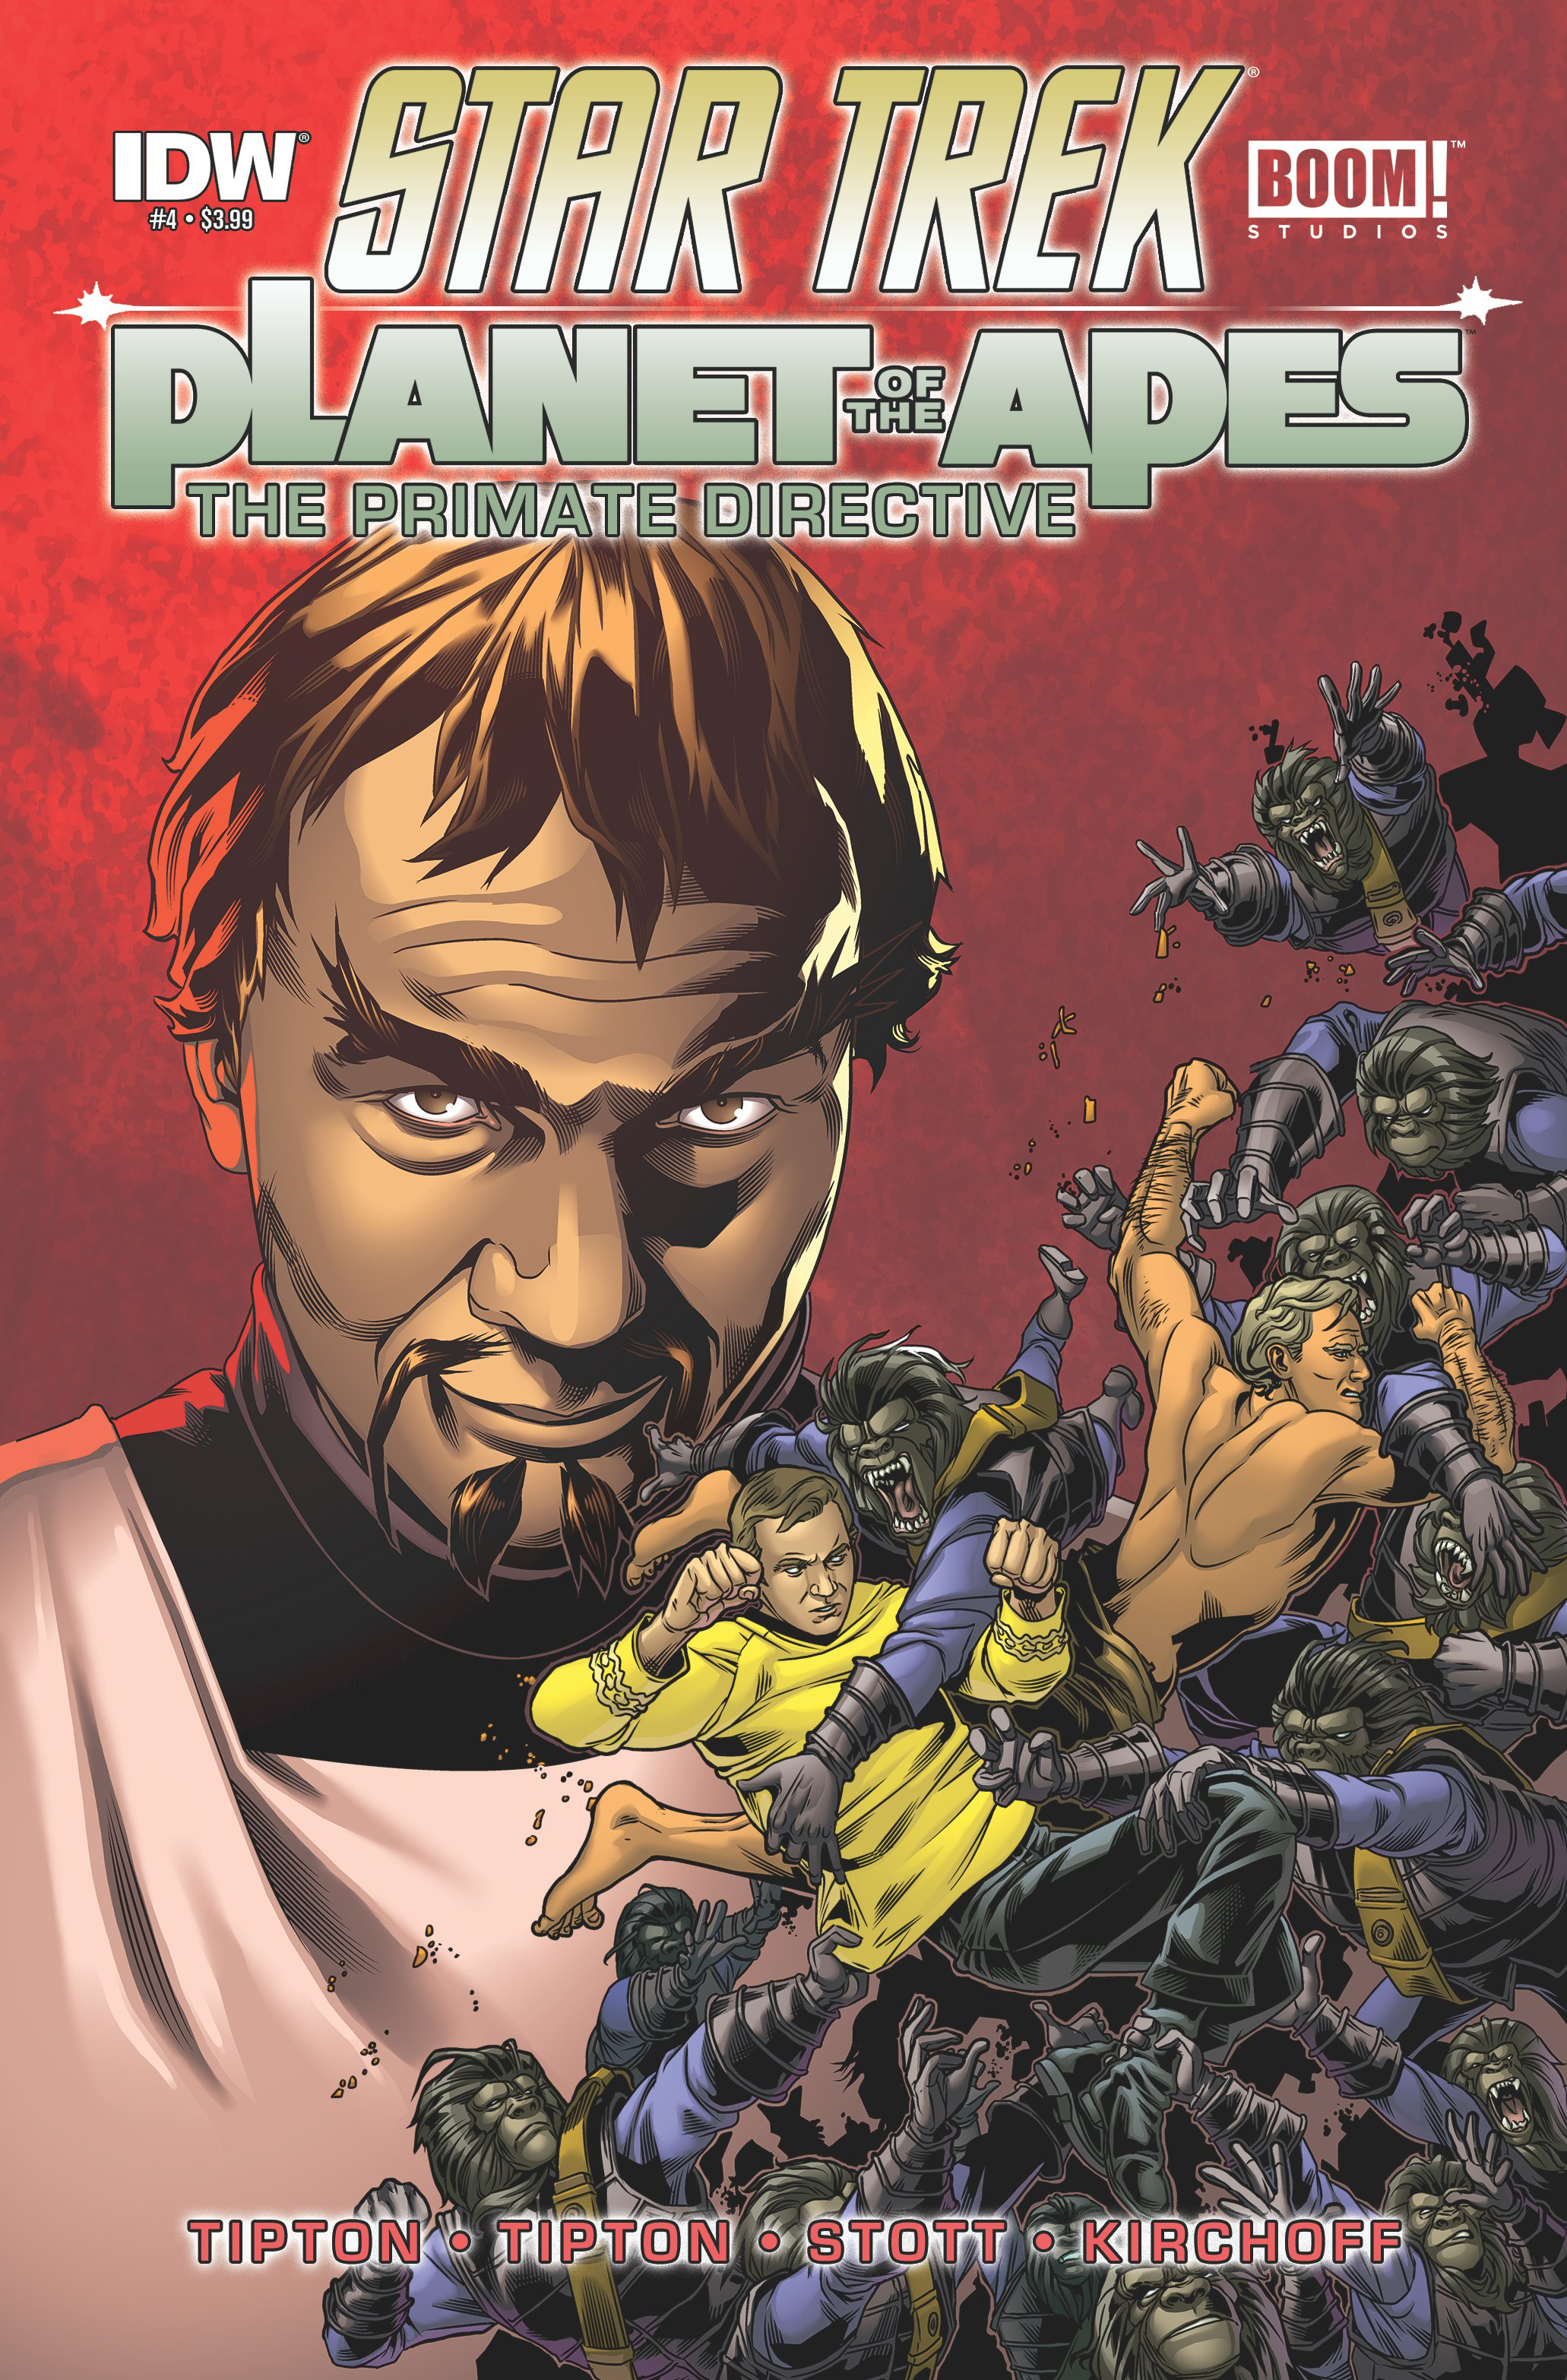 STAR TREK PLANET OF THE APES #4 (OF 5)